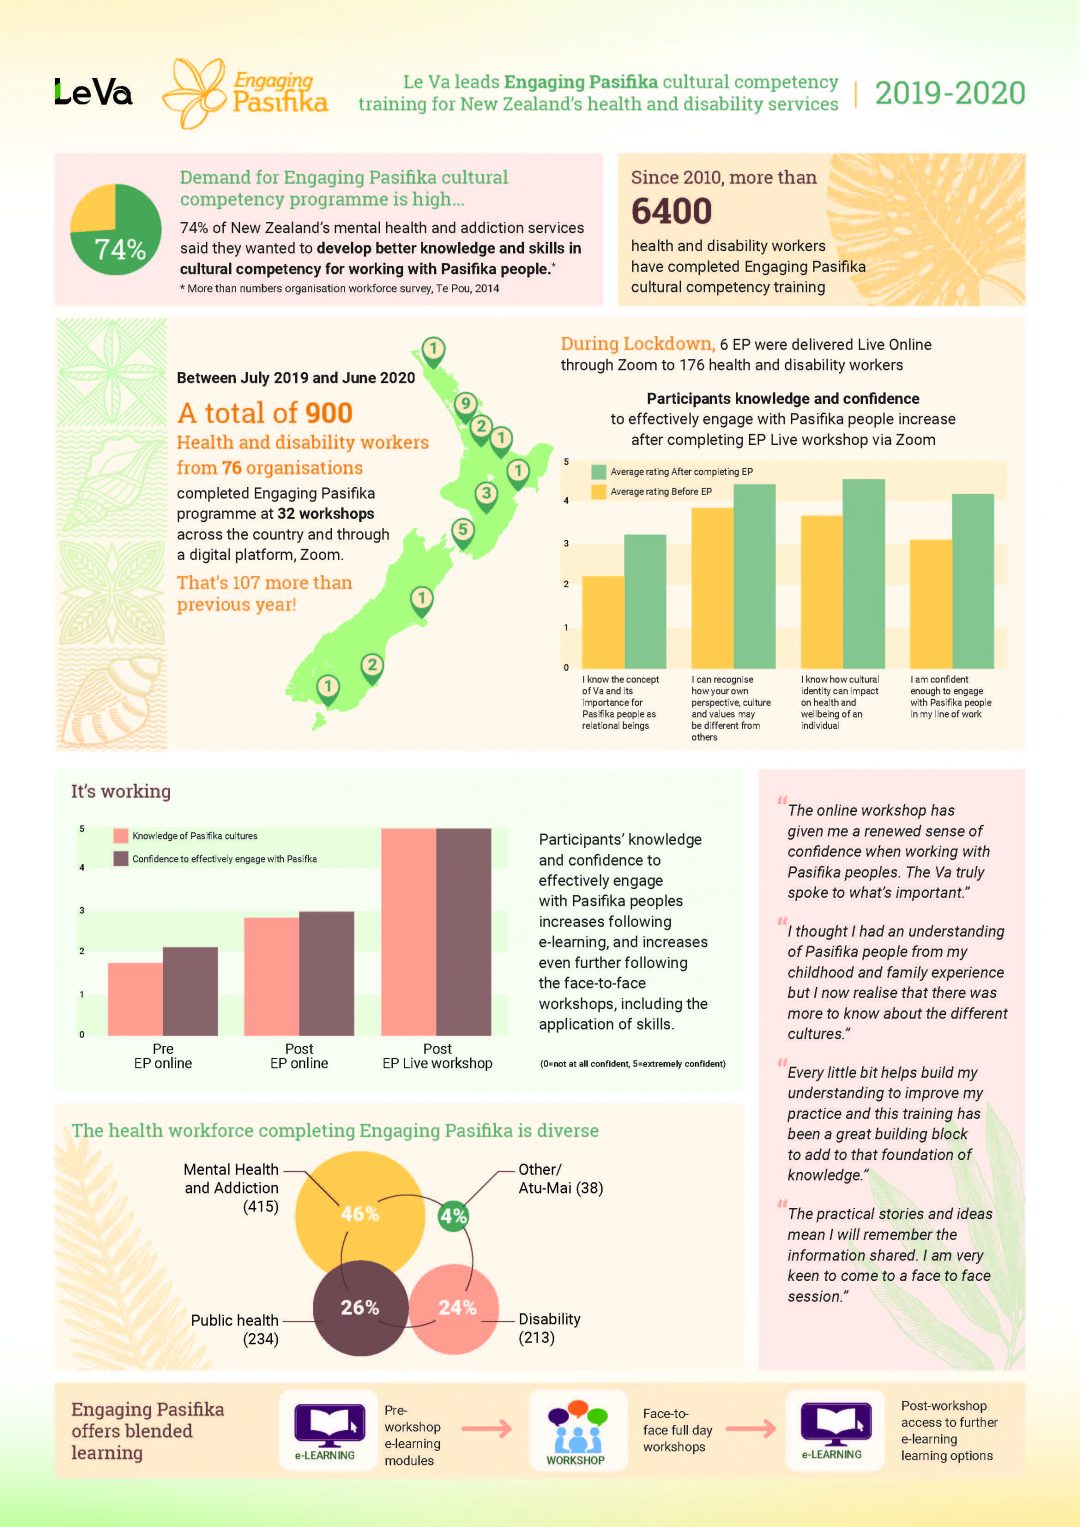 Engaging Pasifika: Connecting Culture and Care